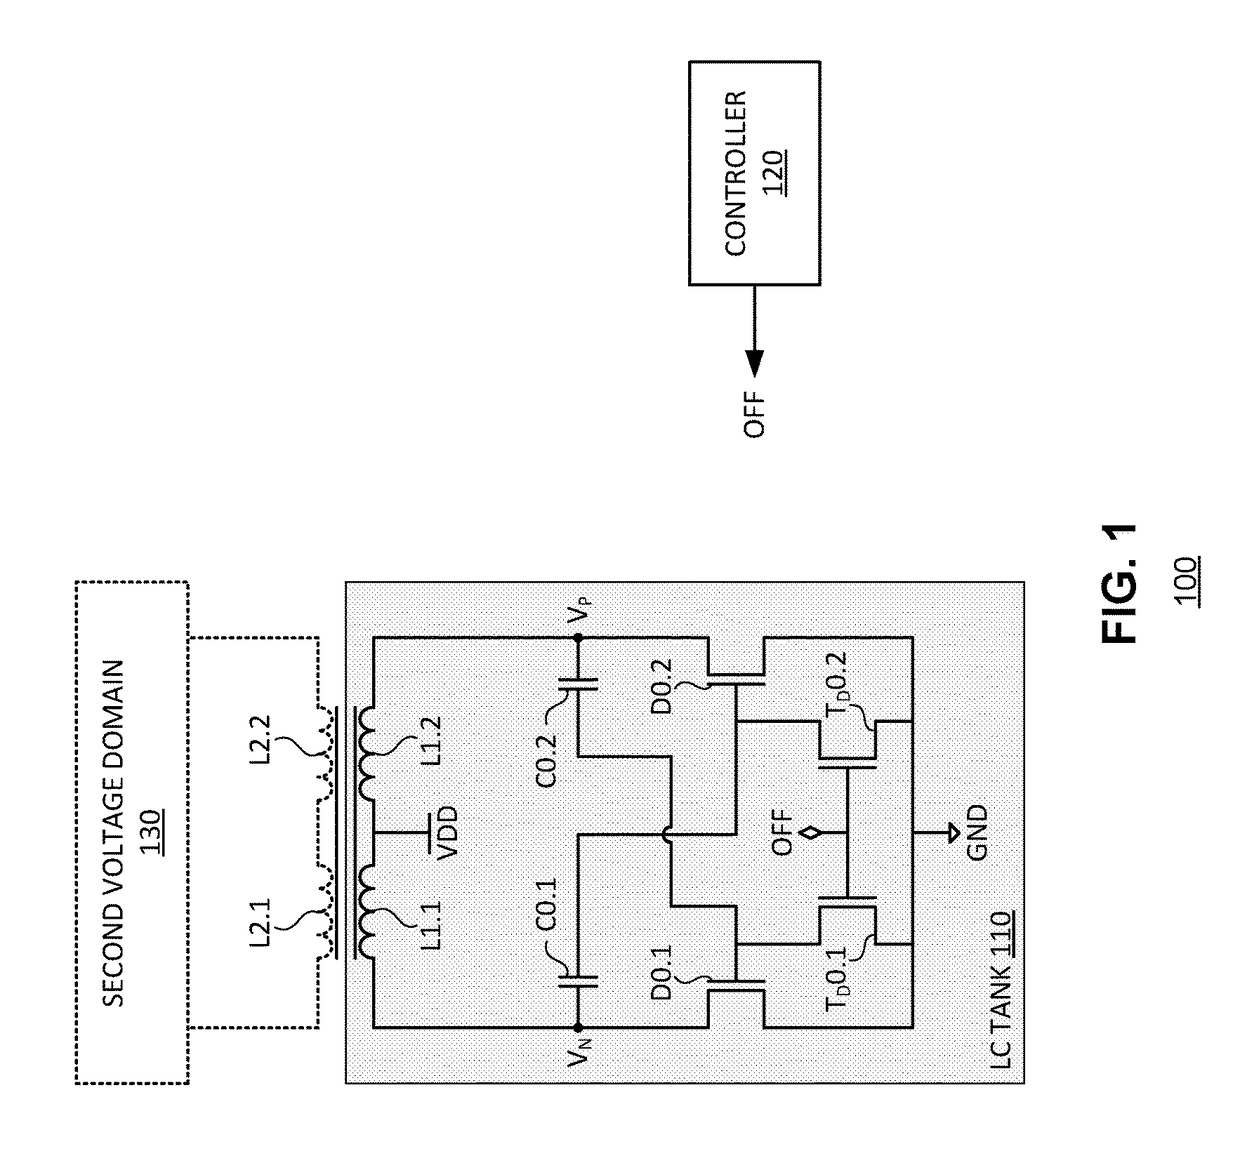 Tank circuit and frequency hopping for isolators